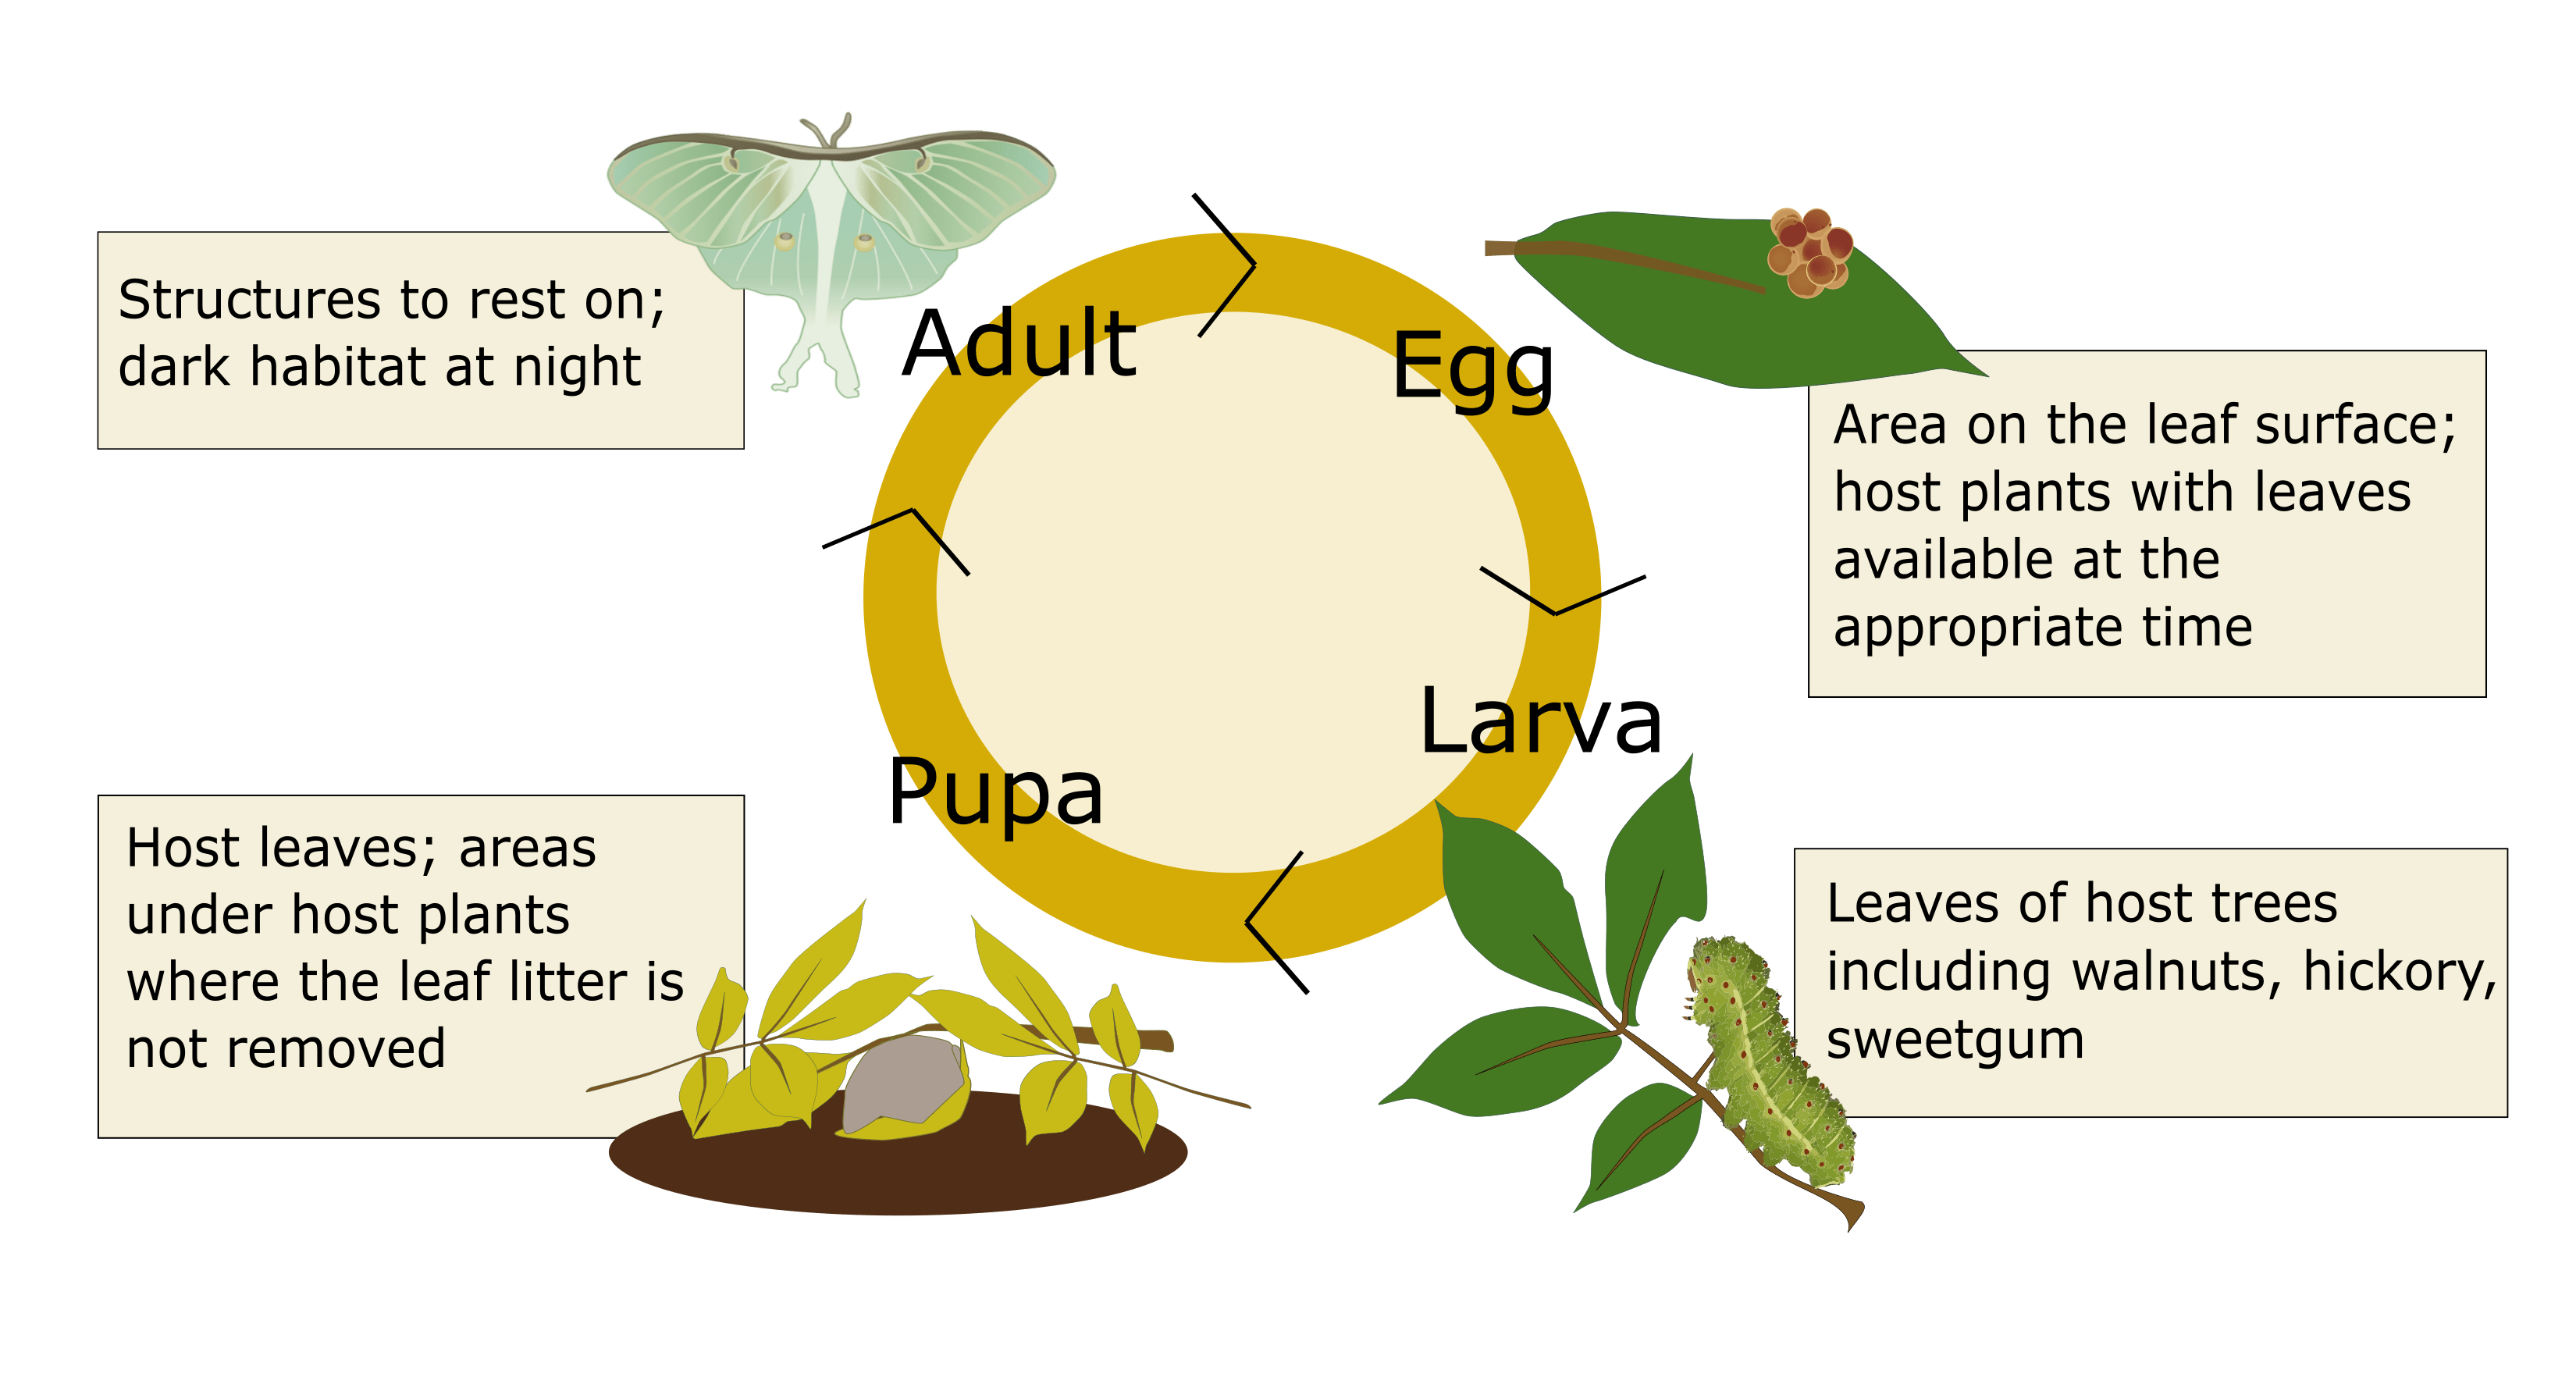 Life cycle of a luna moth that circles from egg, to larva to pupa to adult. Habitat needs for each life stage are listed next to each life stage. Eggs need the area of the leaf surface and host plants with available leaves at the appropriate time. Larva need the leaves of host trees including walnuts, hickory, and sweetgum. Pupa need host leaves and areas under host plants where the leaf litter is not removed. Adults need structures to rest on and dark habitat at night.